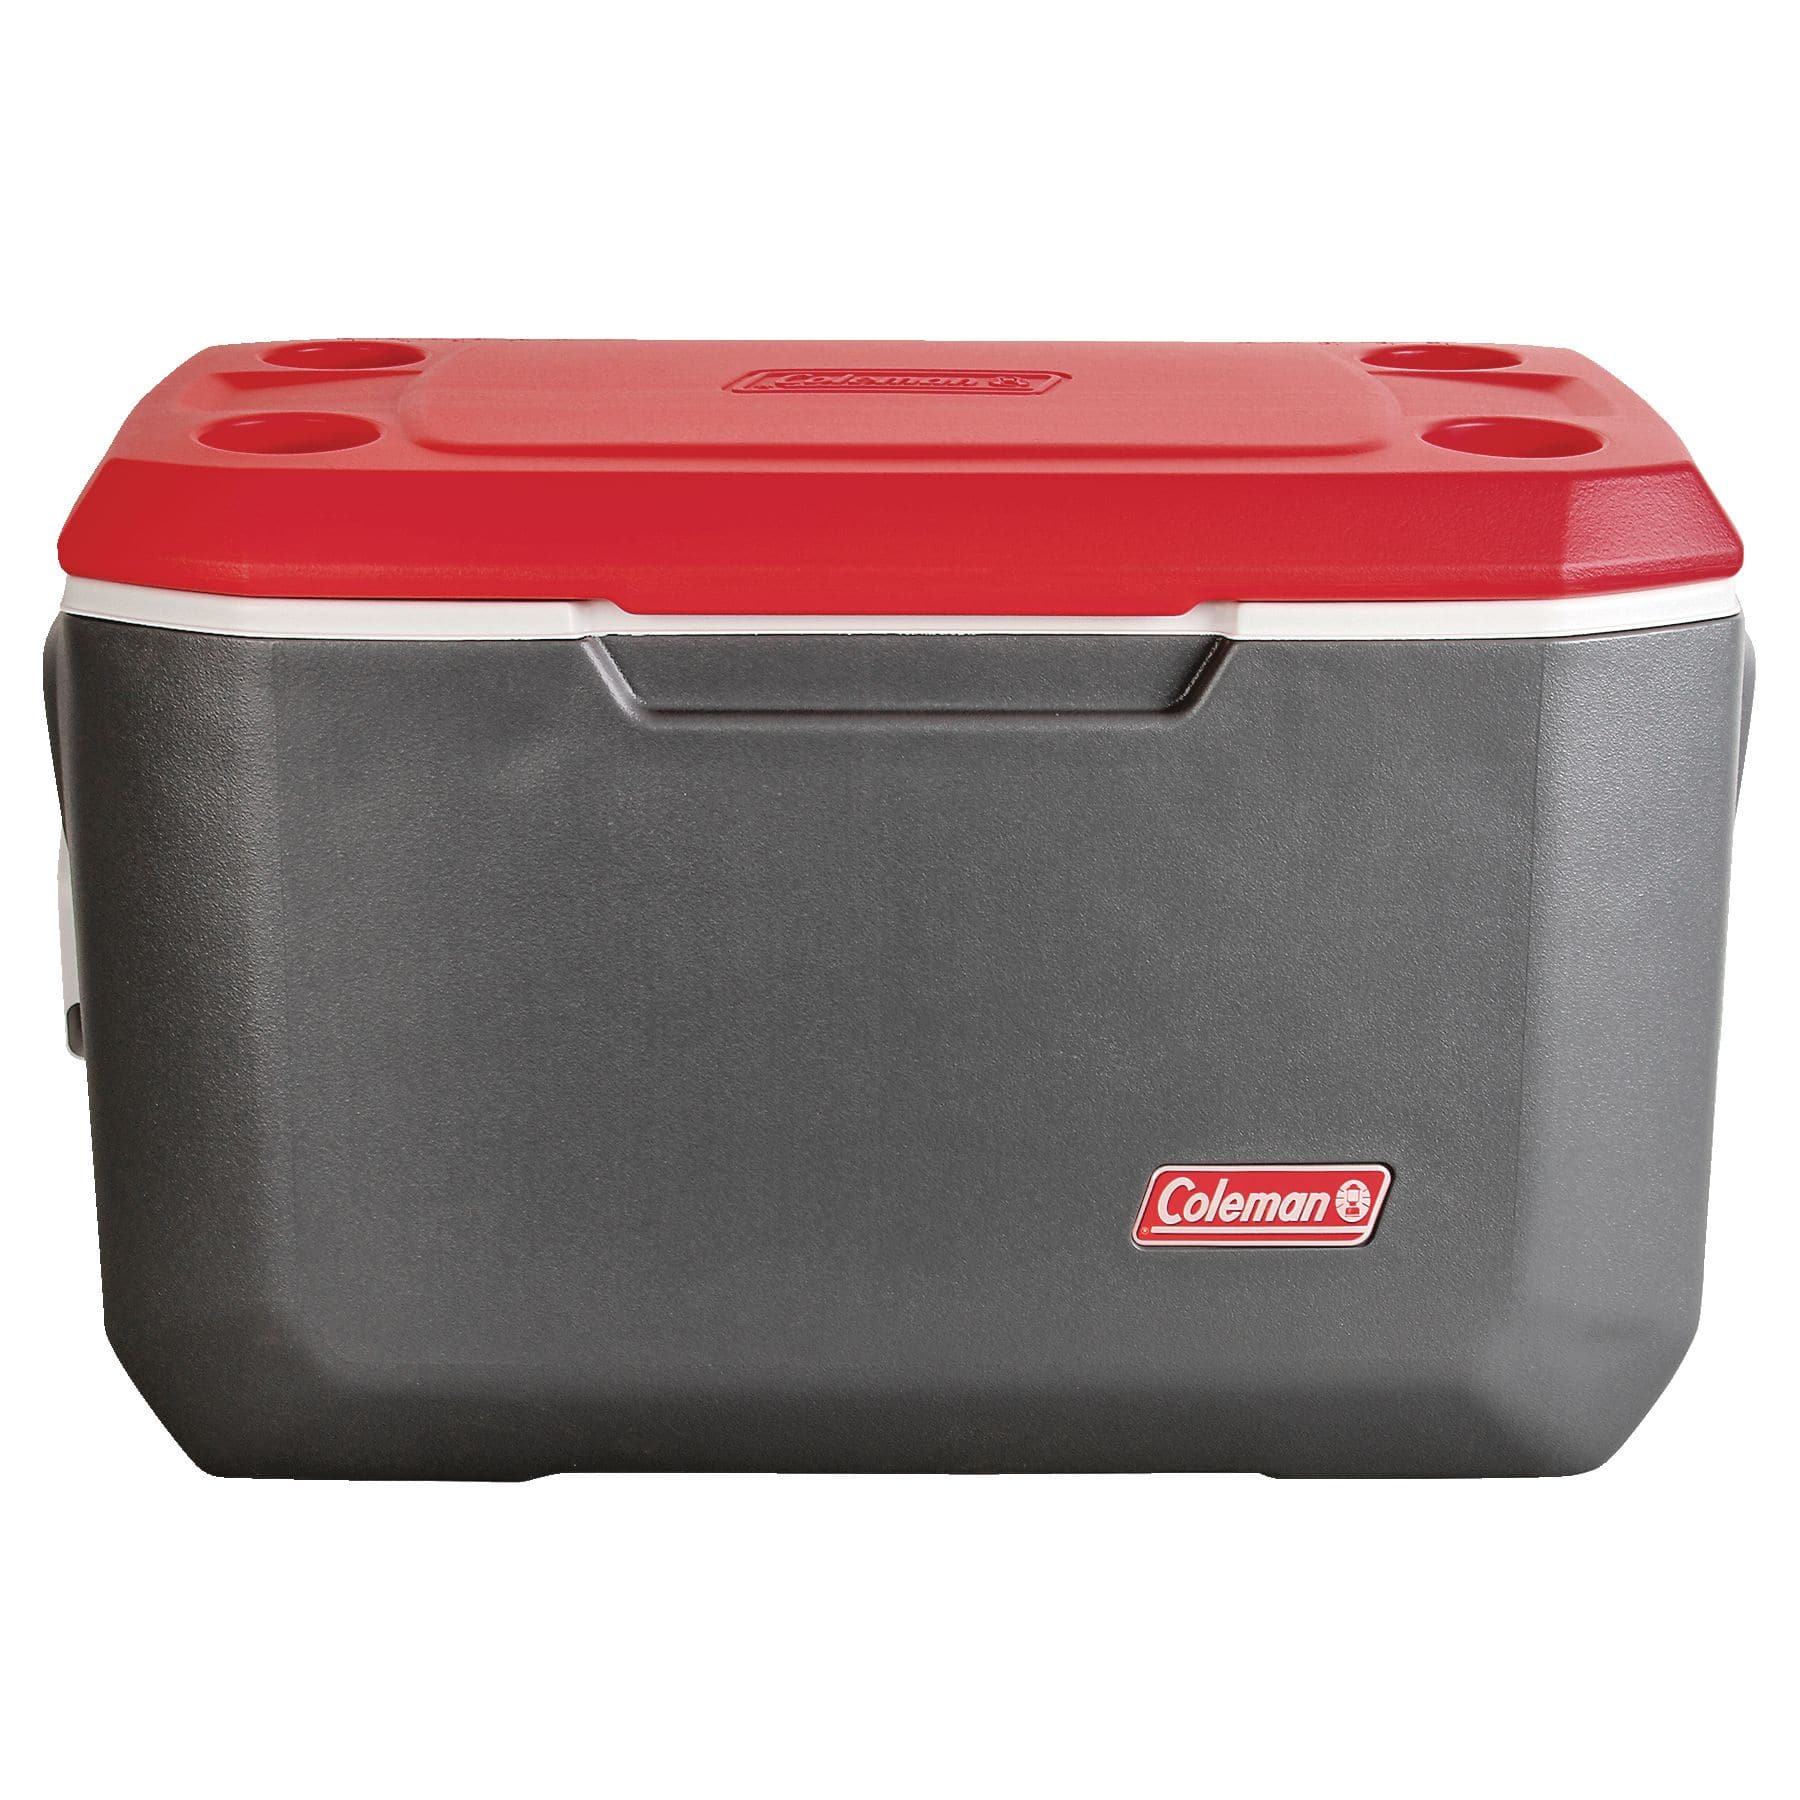 Coleman Xtreme 70-Quart 5-Day Hard Cooler, Grey and Red, 66-L